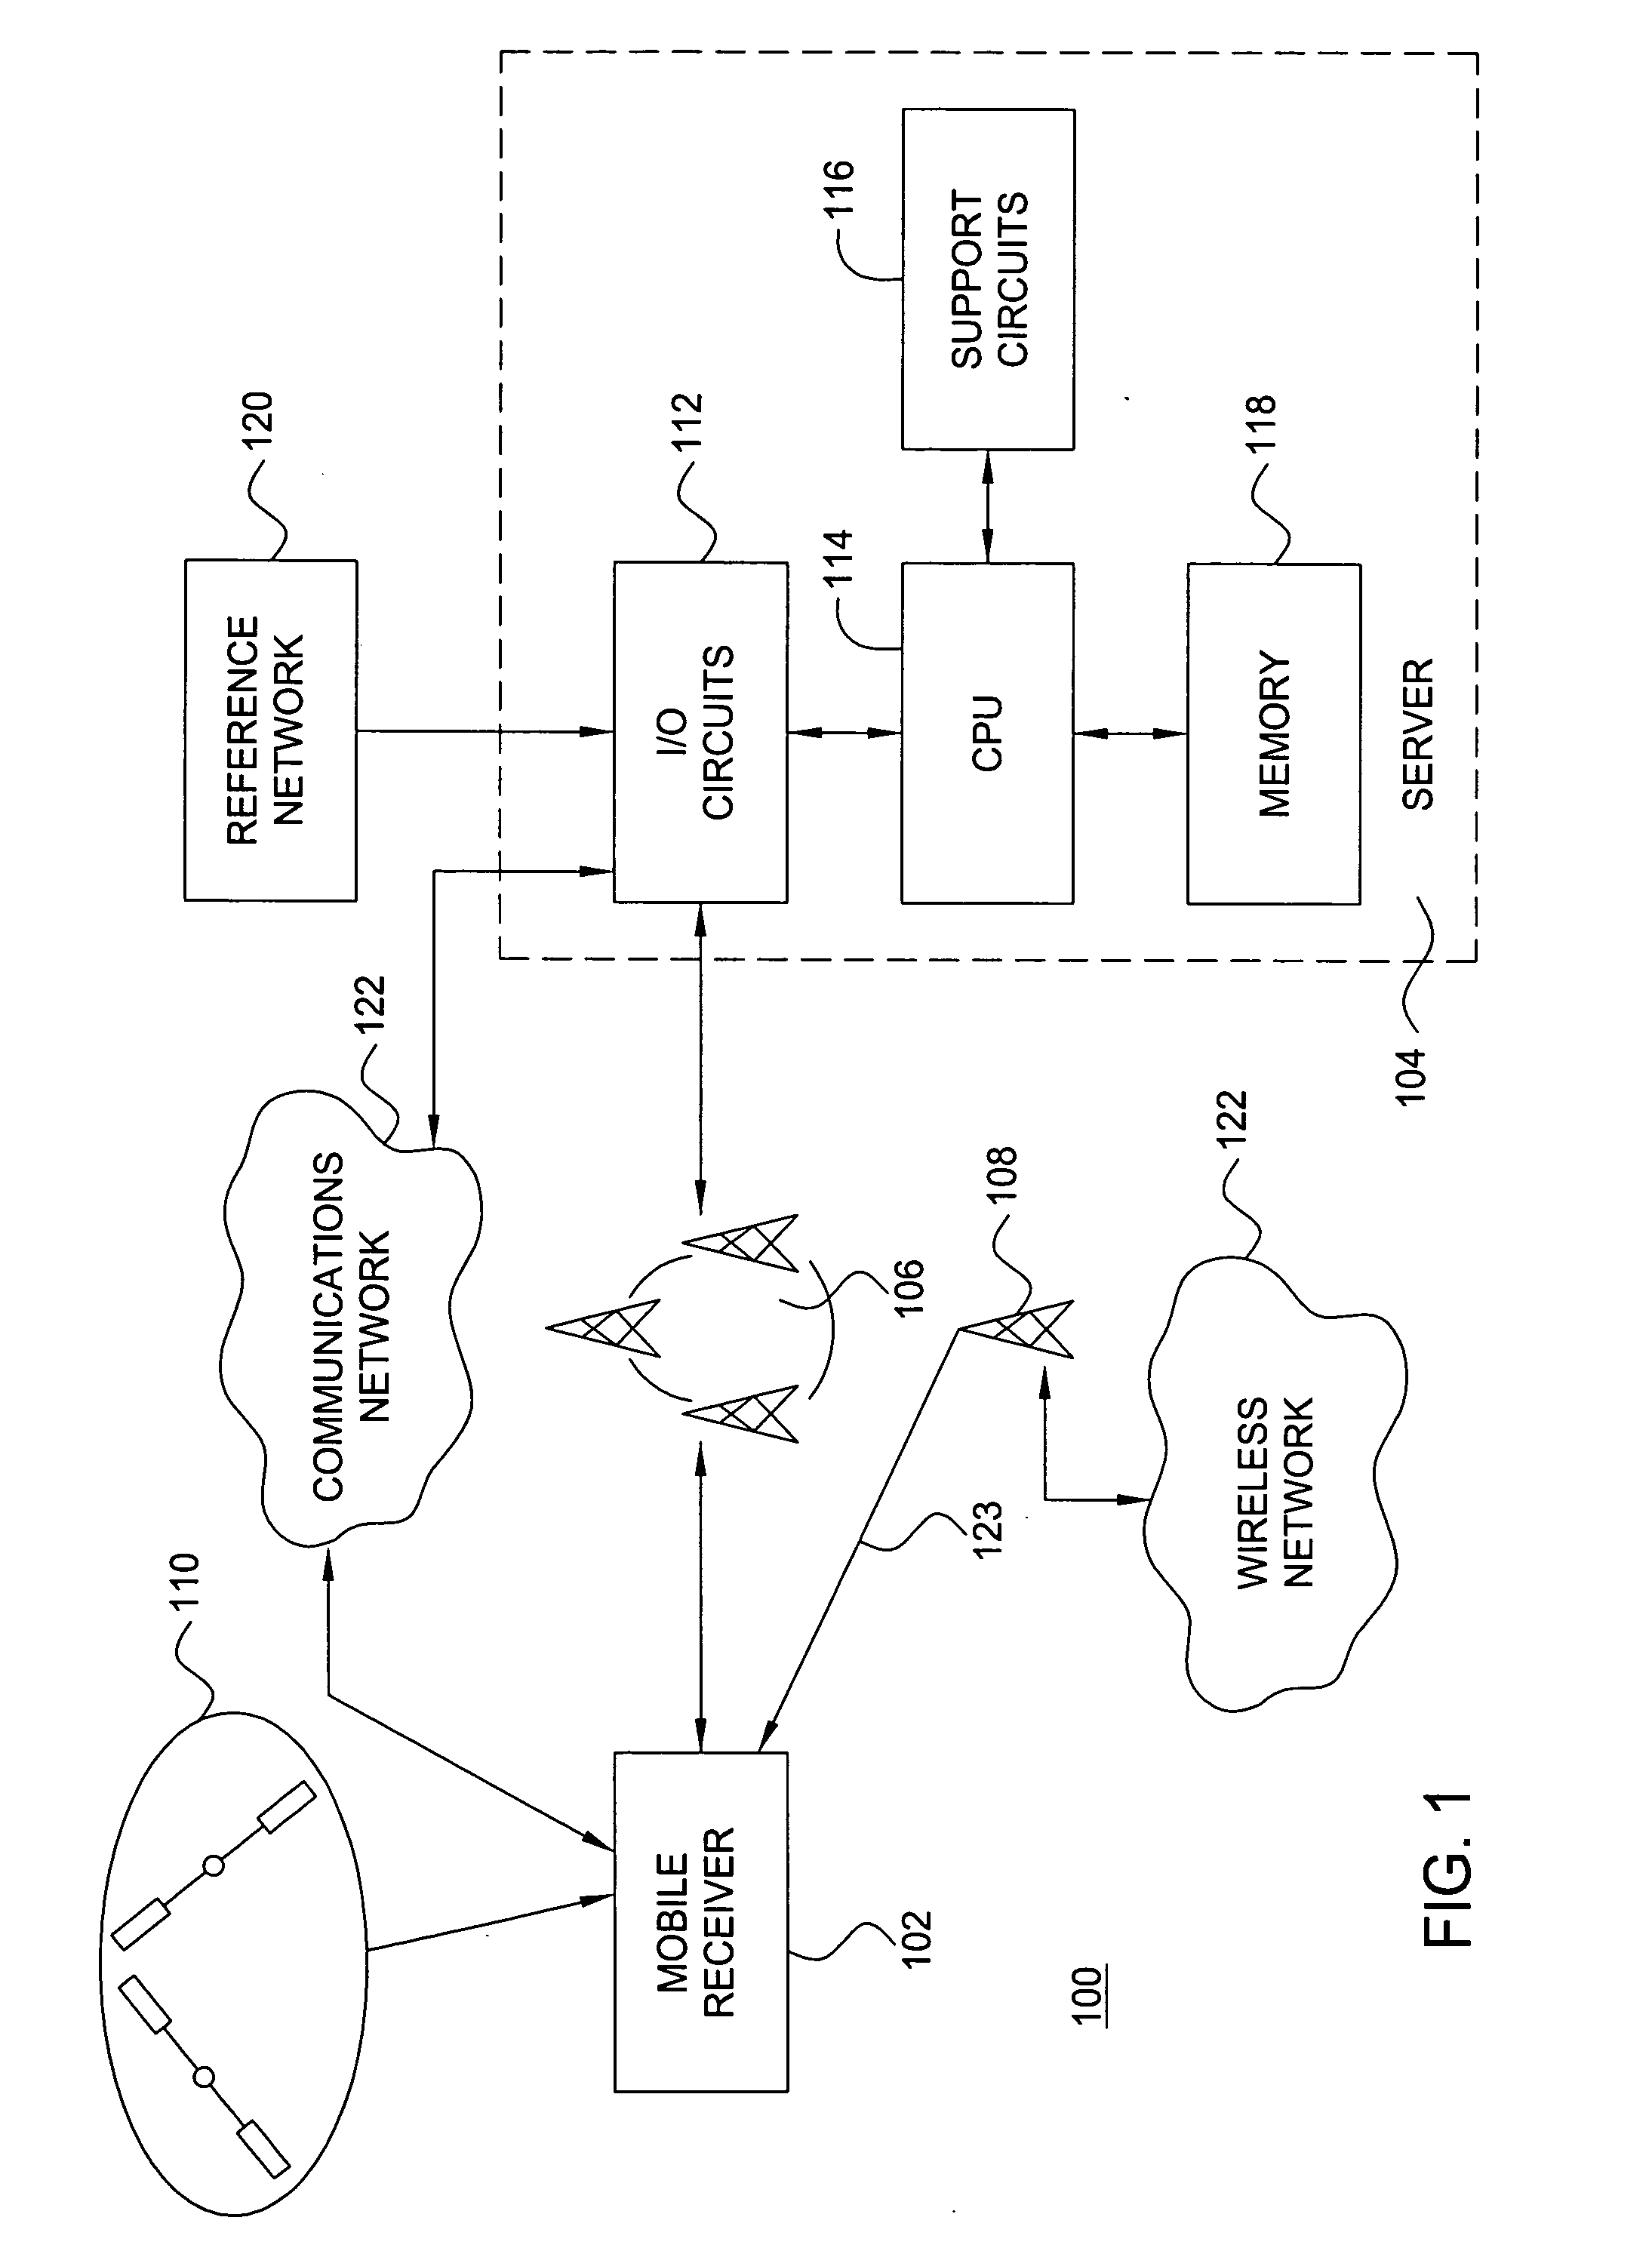 Method and apparatus for processing a satellite positioning system signal using a cellular acquisition signal